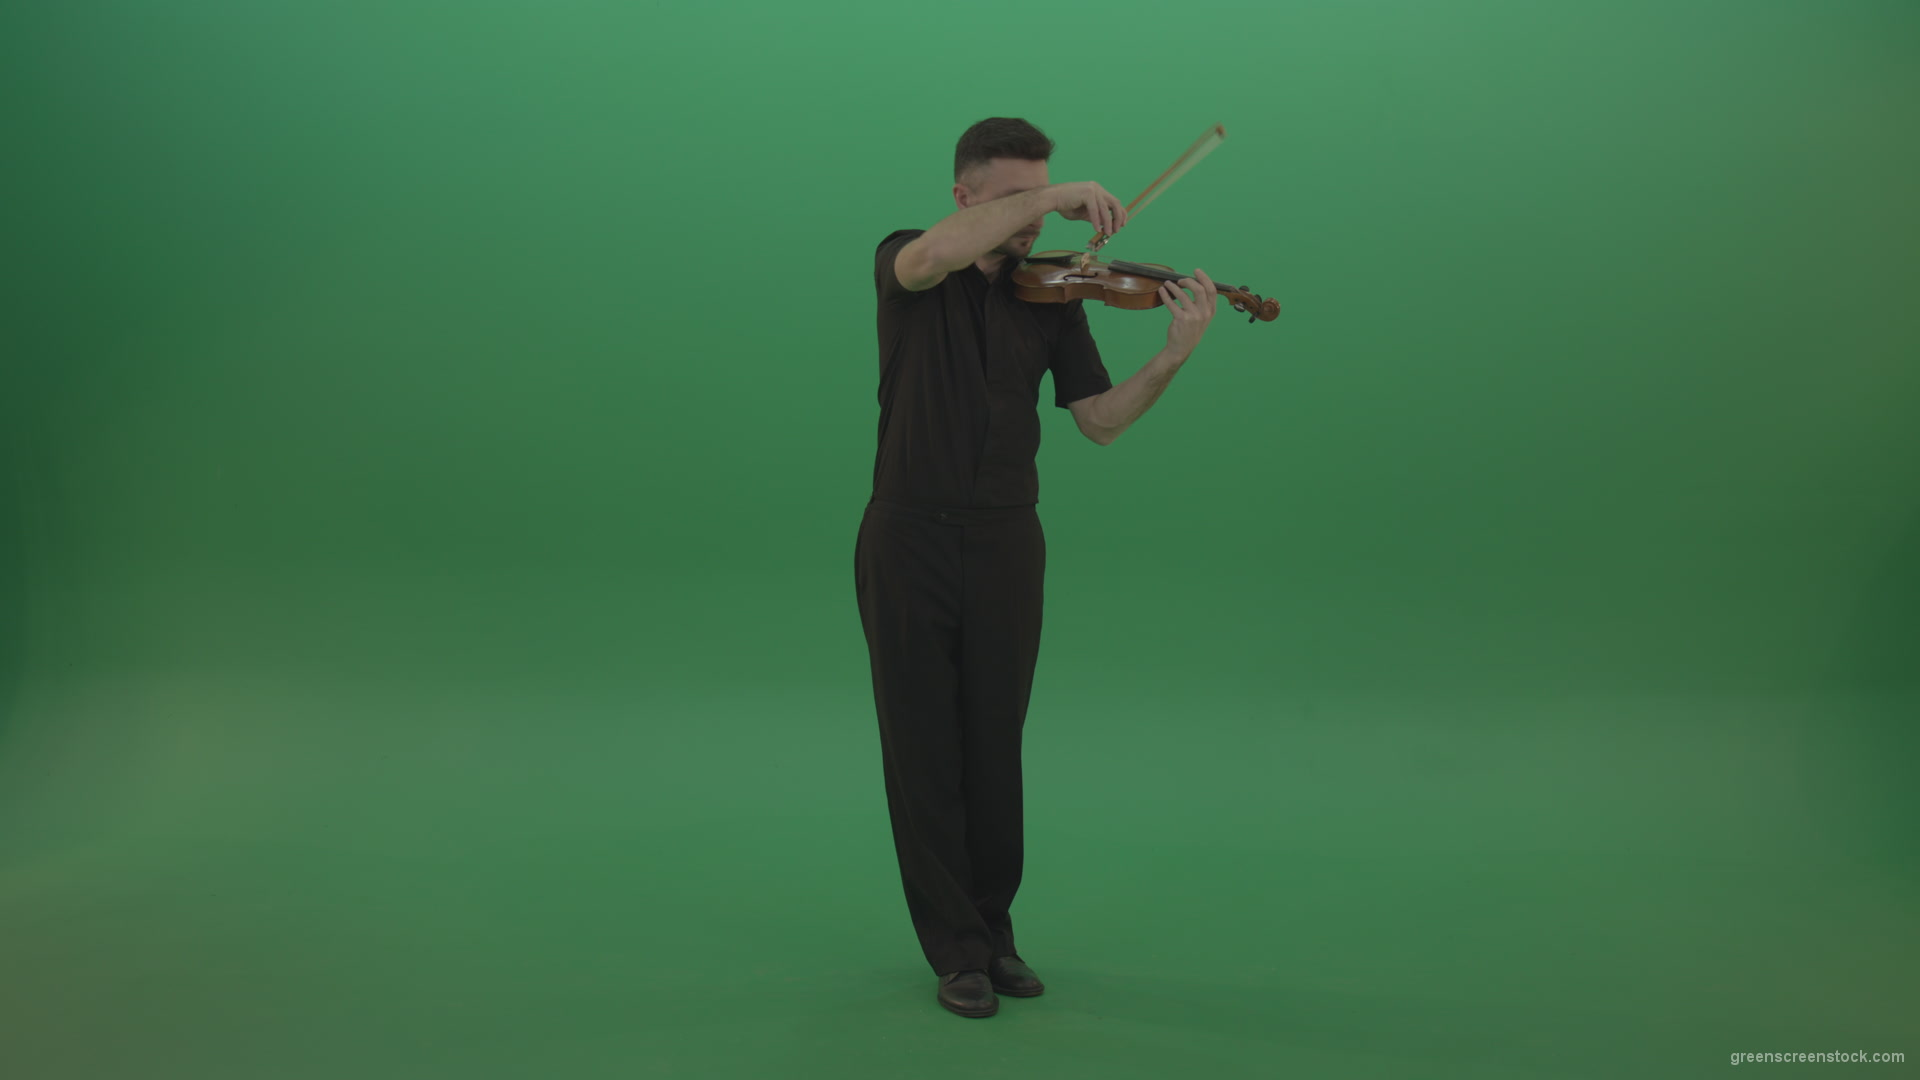 Full-size-view-virtuoso-Man-in-black-costume-play-violin-fiddle-strings-music-instument-on-green-screen_001 Green Screen Stock